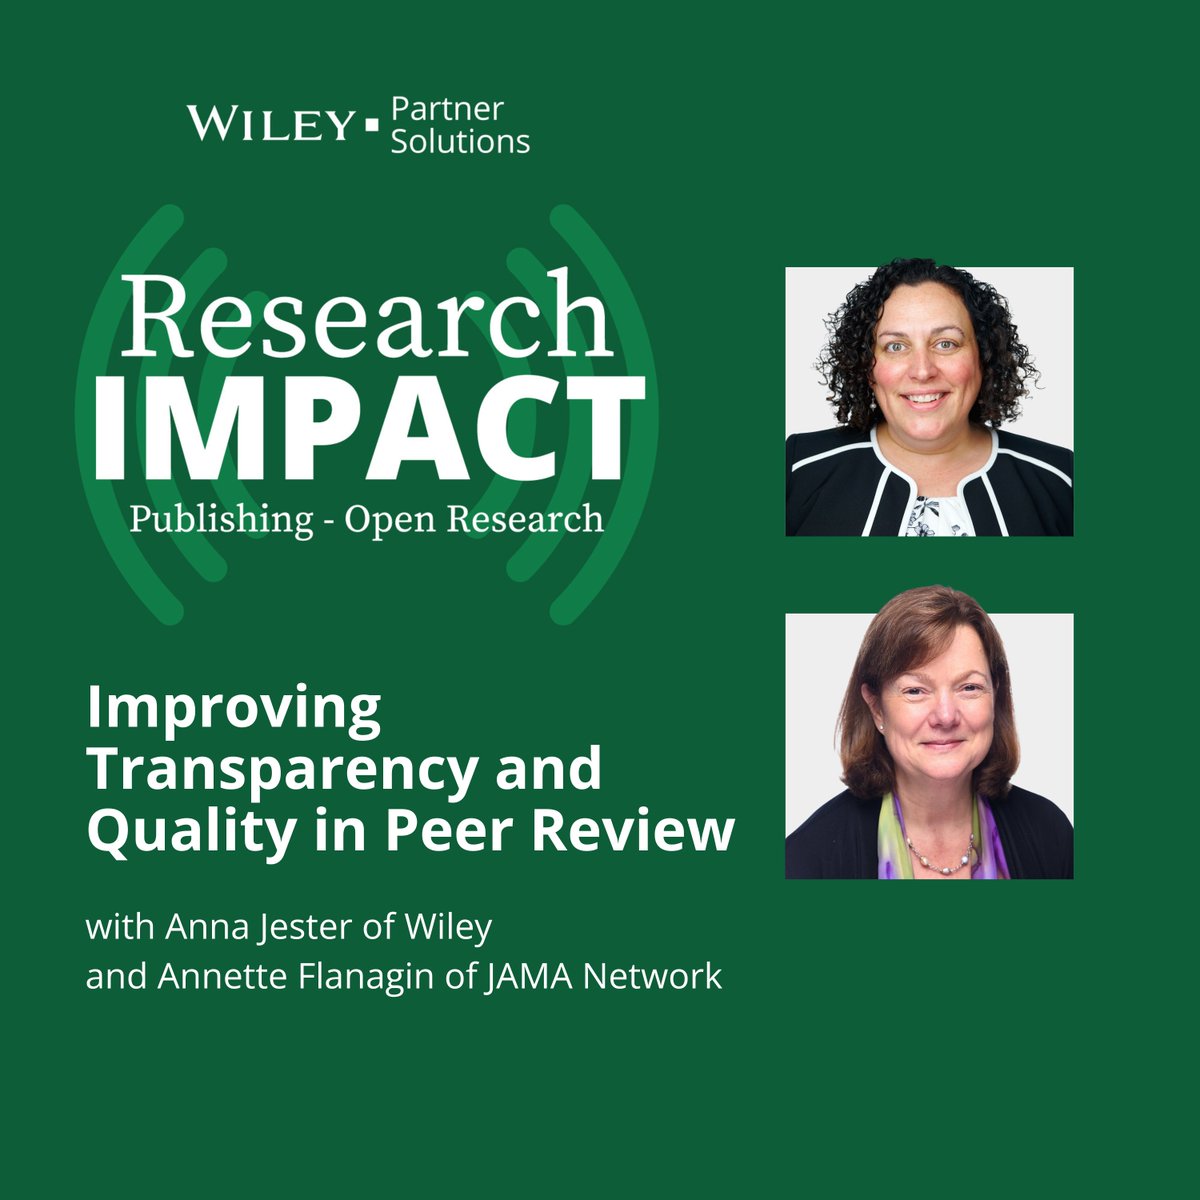 🎙️ The latest Research Impact #podcast episode is here! Anna Jester and Annette Flanagin explore how scholarly publishing is adapting peer review, including topics on #AI in the peer review process, developing inclusive policies, and more. Listen now: ow.ly/1TW650Rp9sl